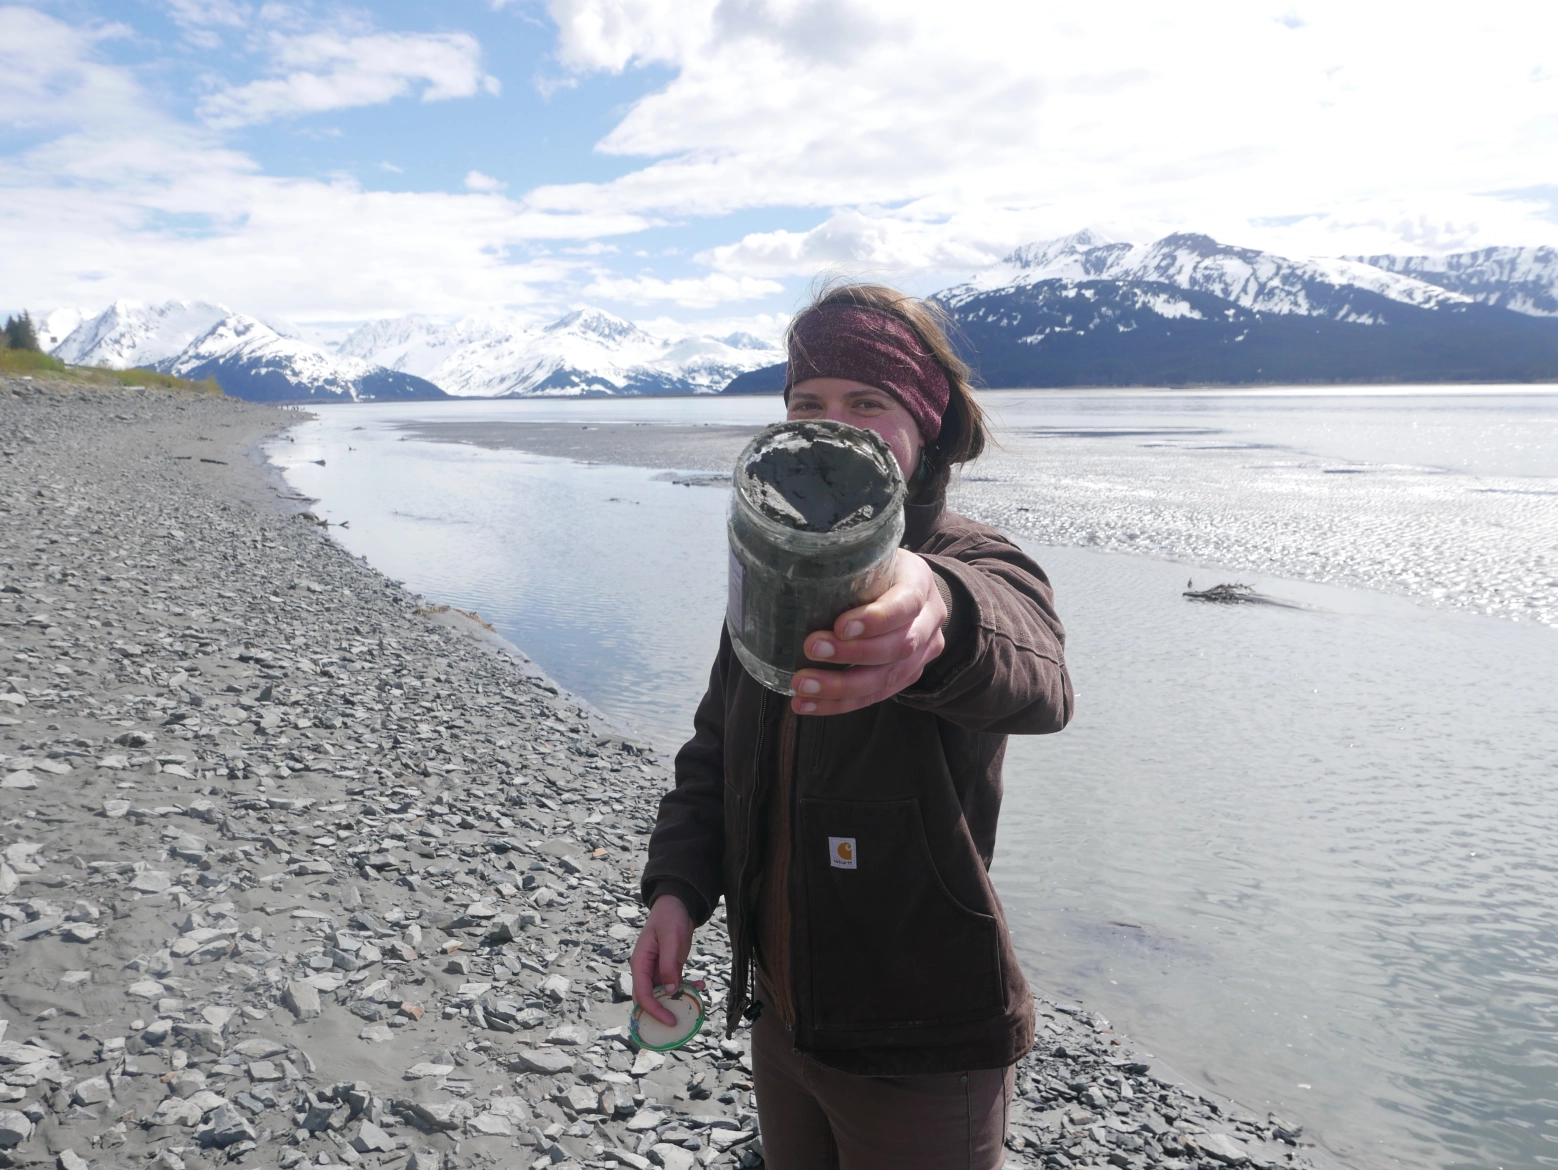 A woman holds up a jar of sediment while standing on a beach with a tidal mudflat, water and snow-covered mountains in the background.